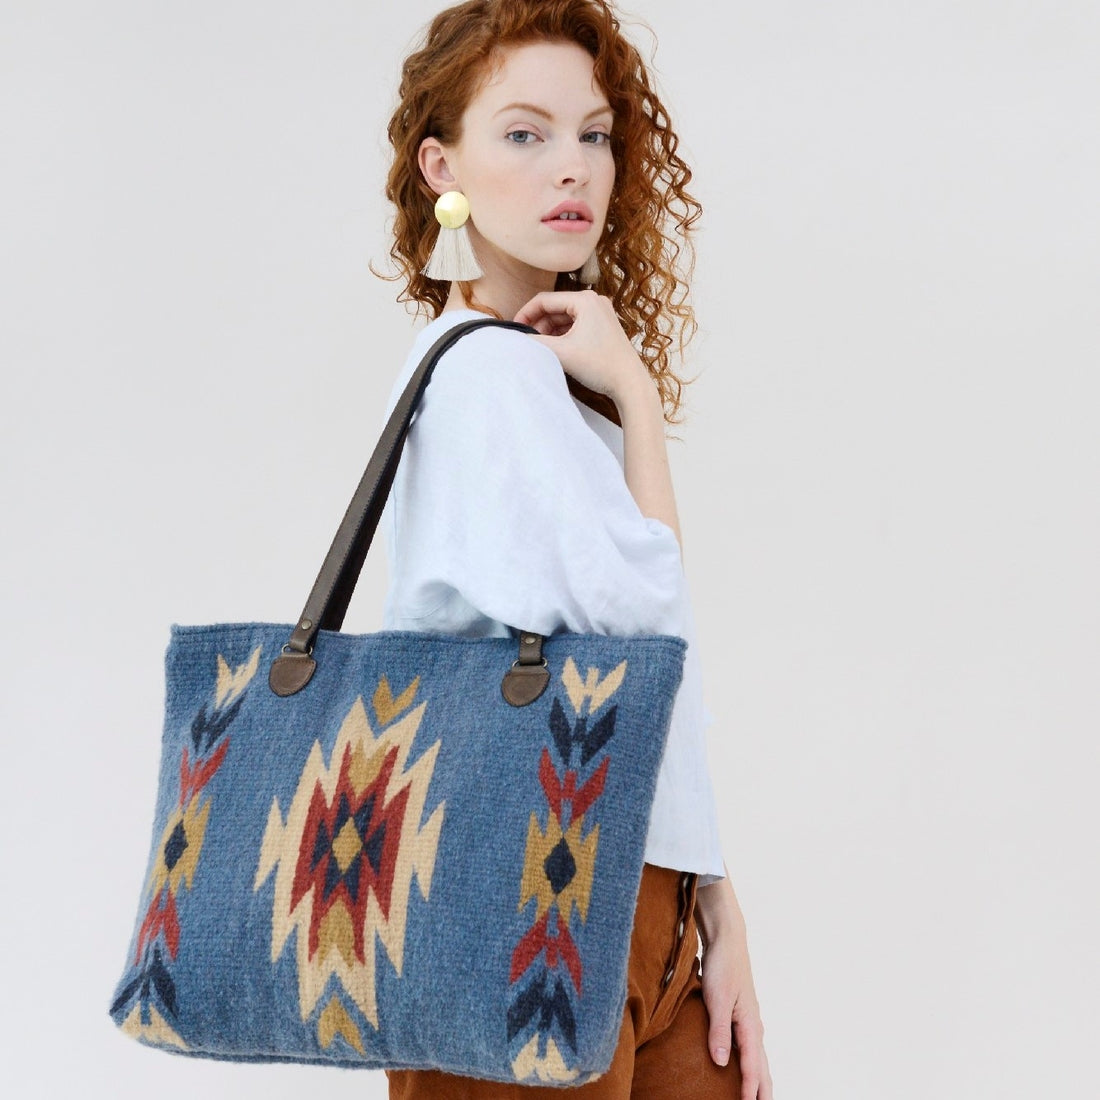 MZ Bags - Sparrow's Song Wool Tote - Multi Colored